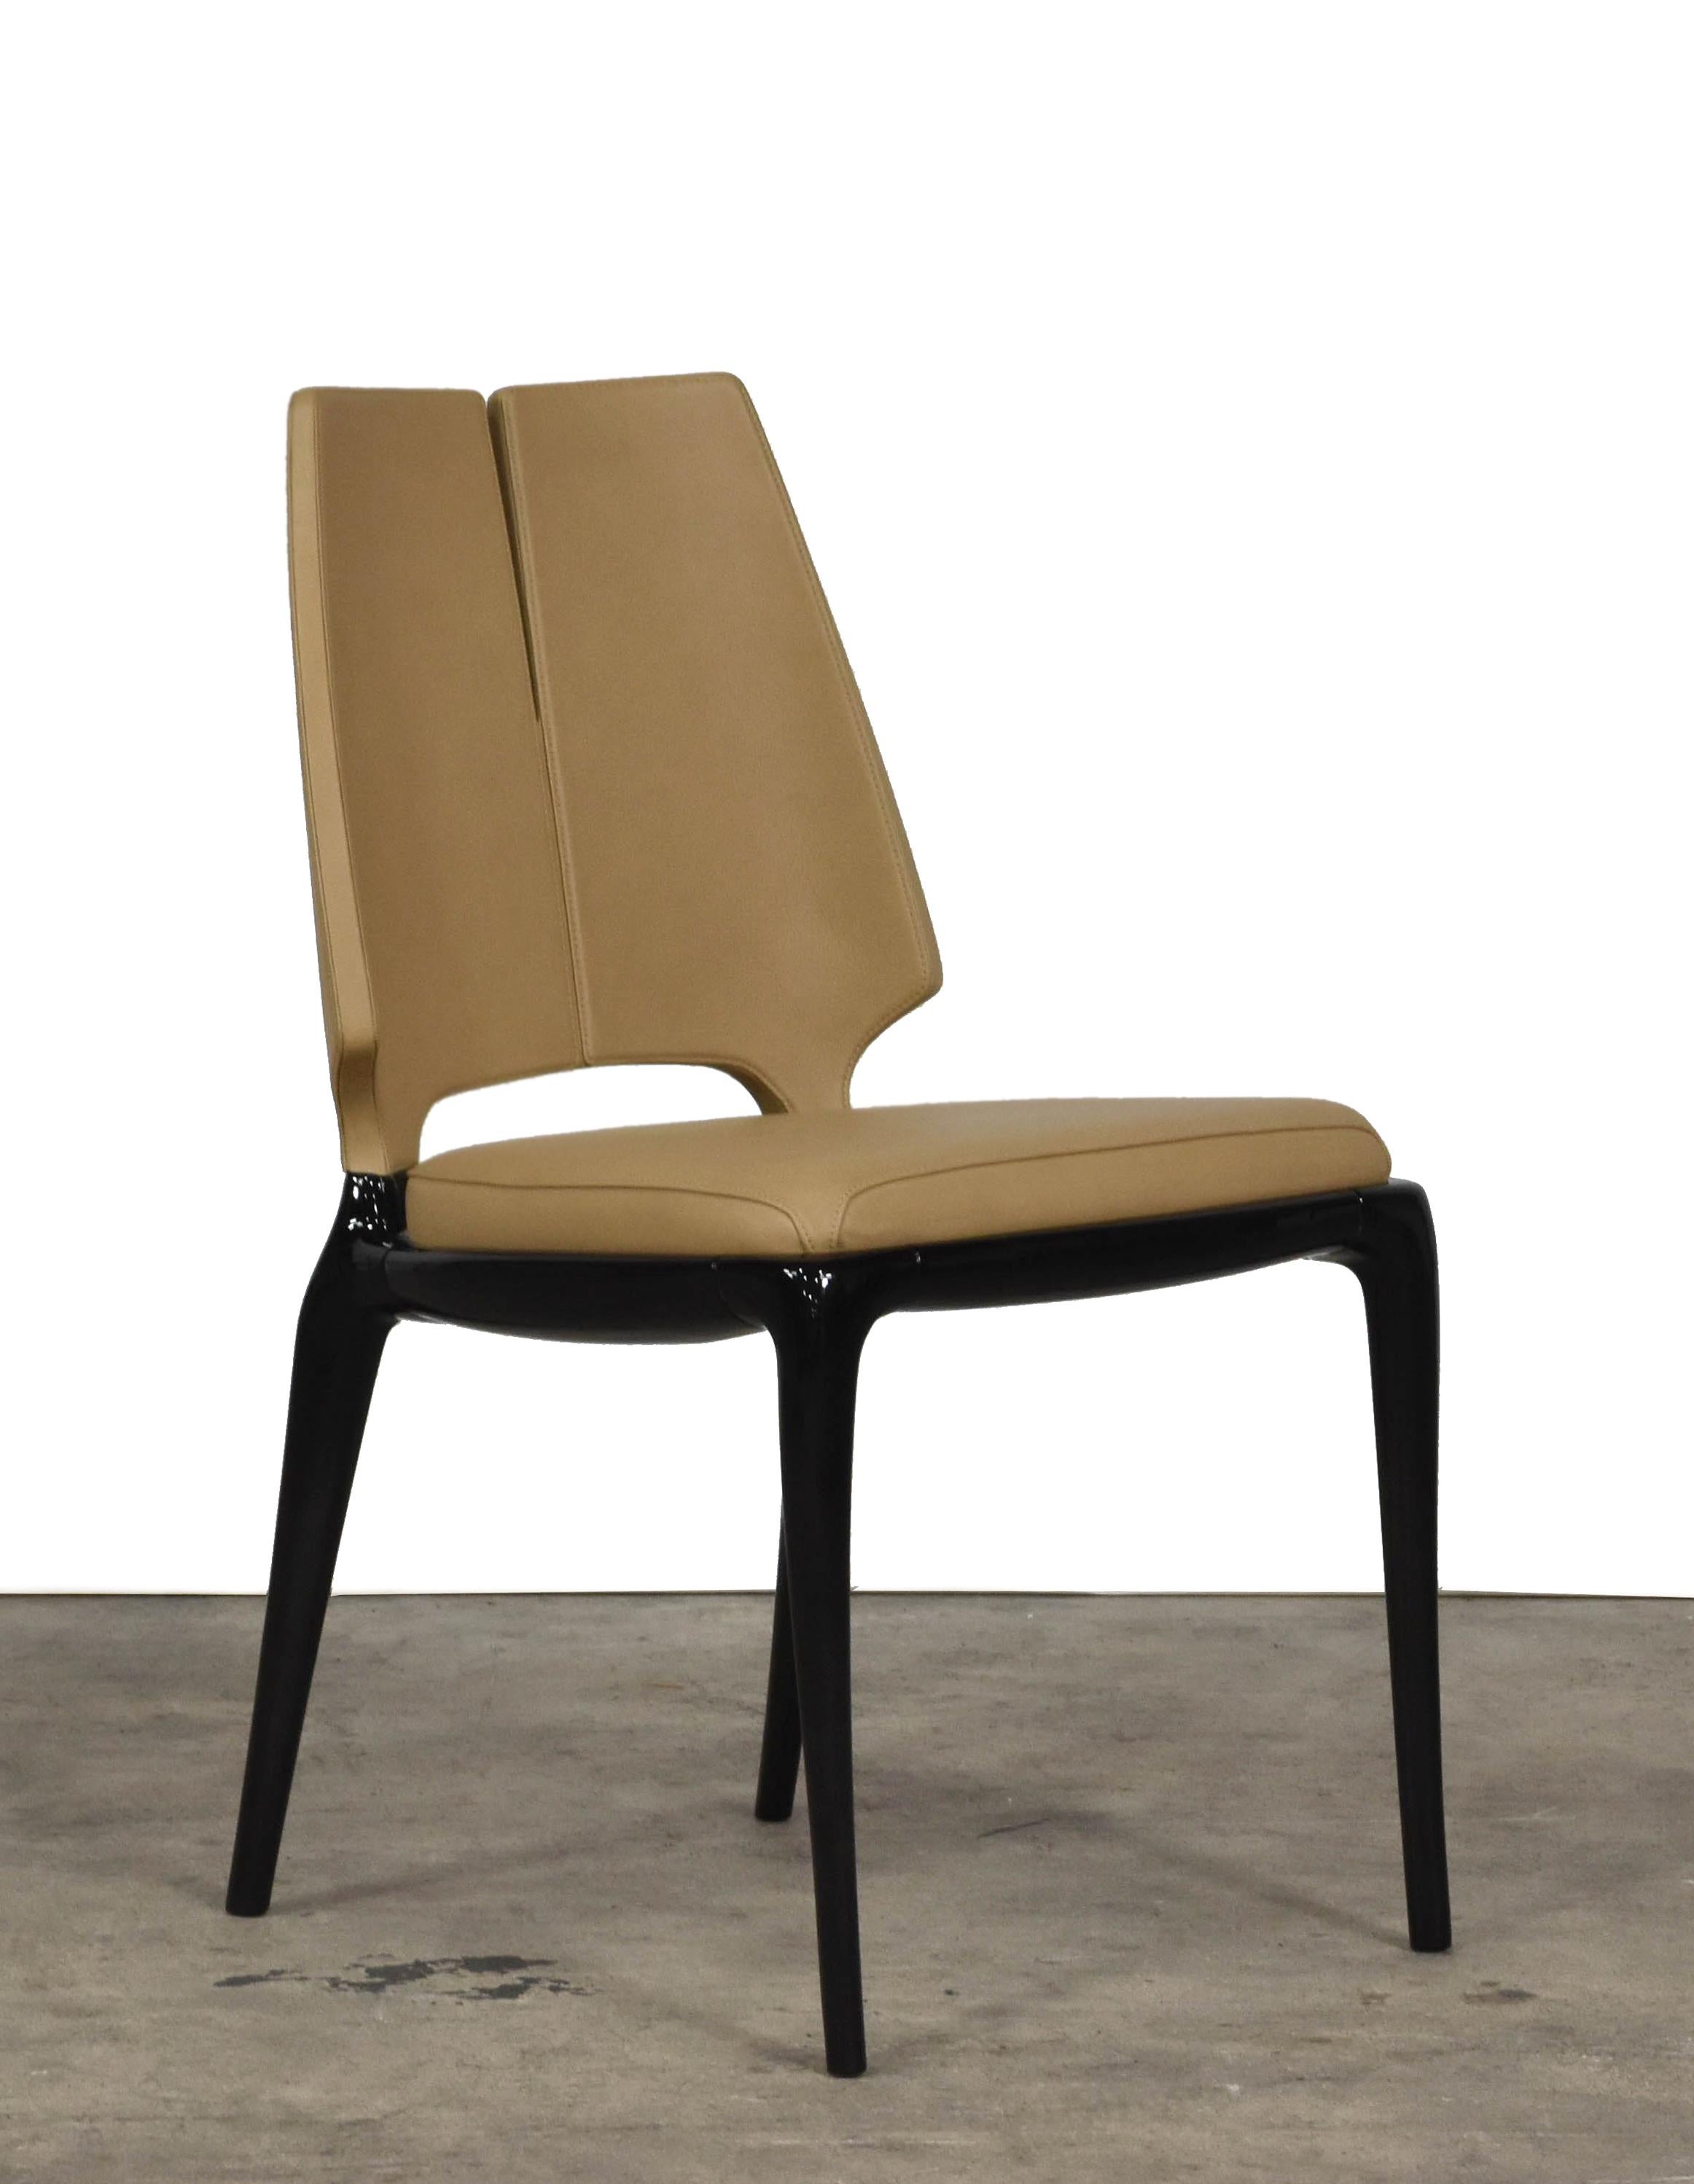 contour chairs